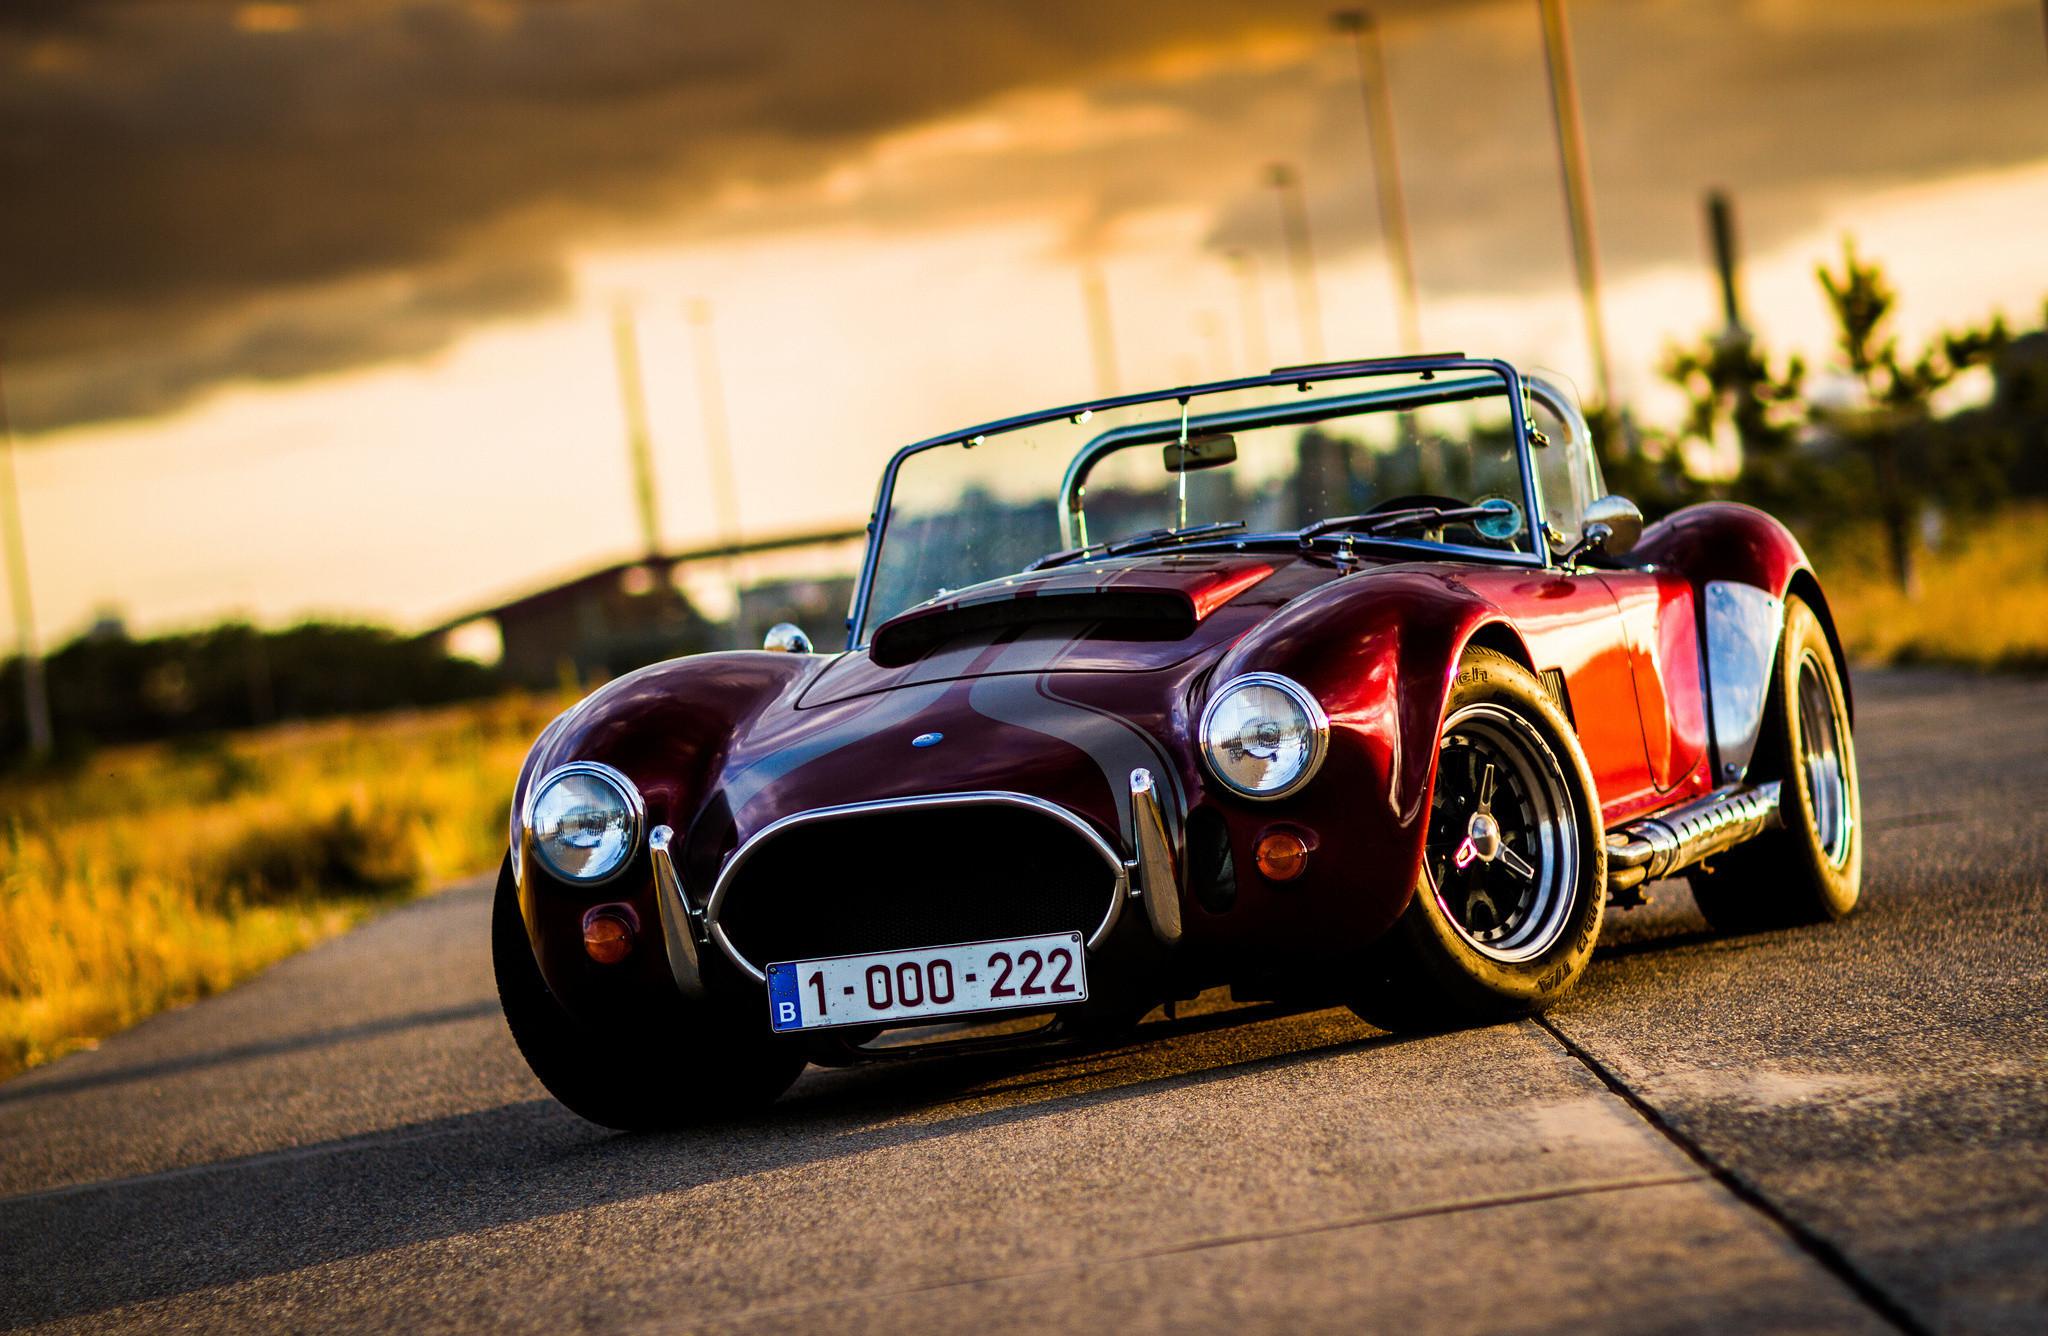 Vintage sports car hd wallpapers